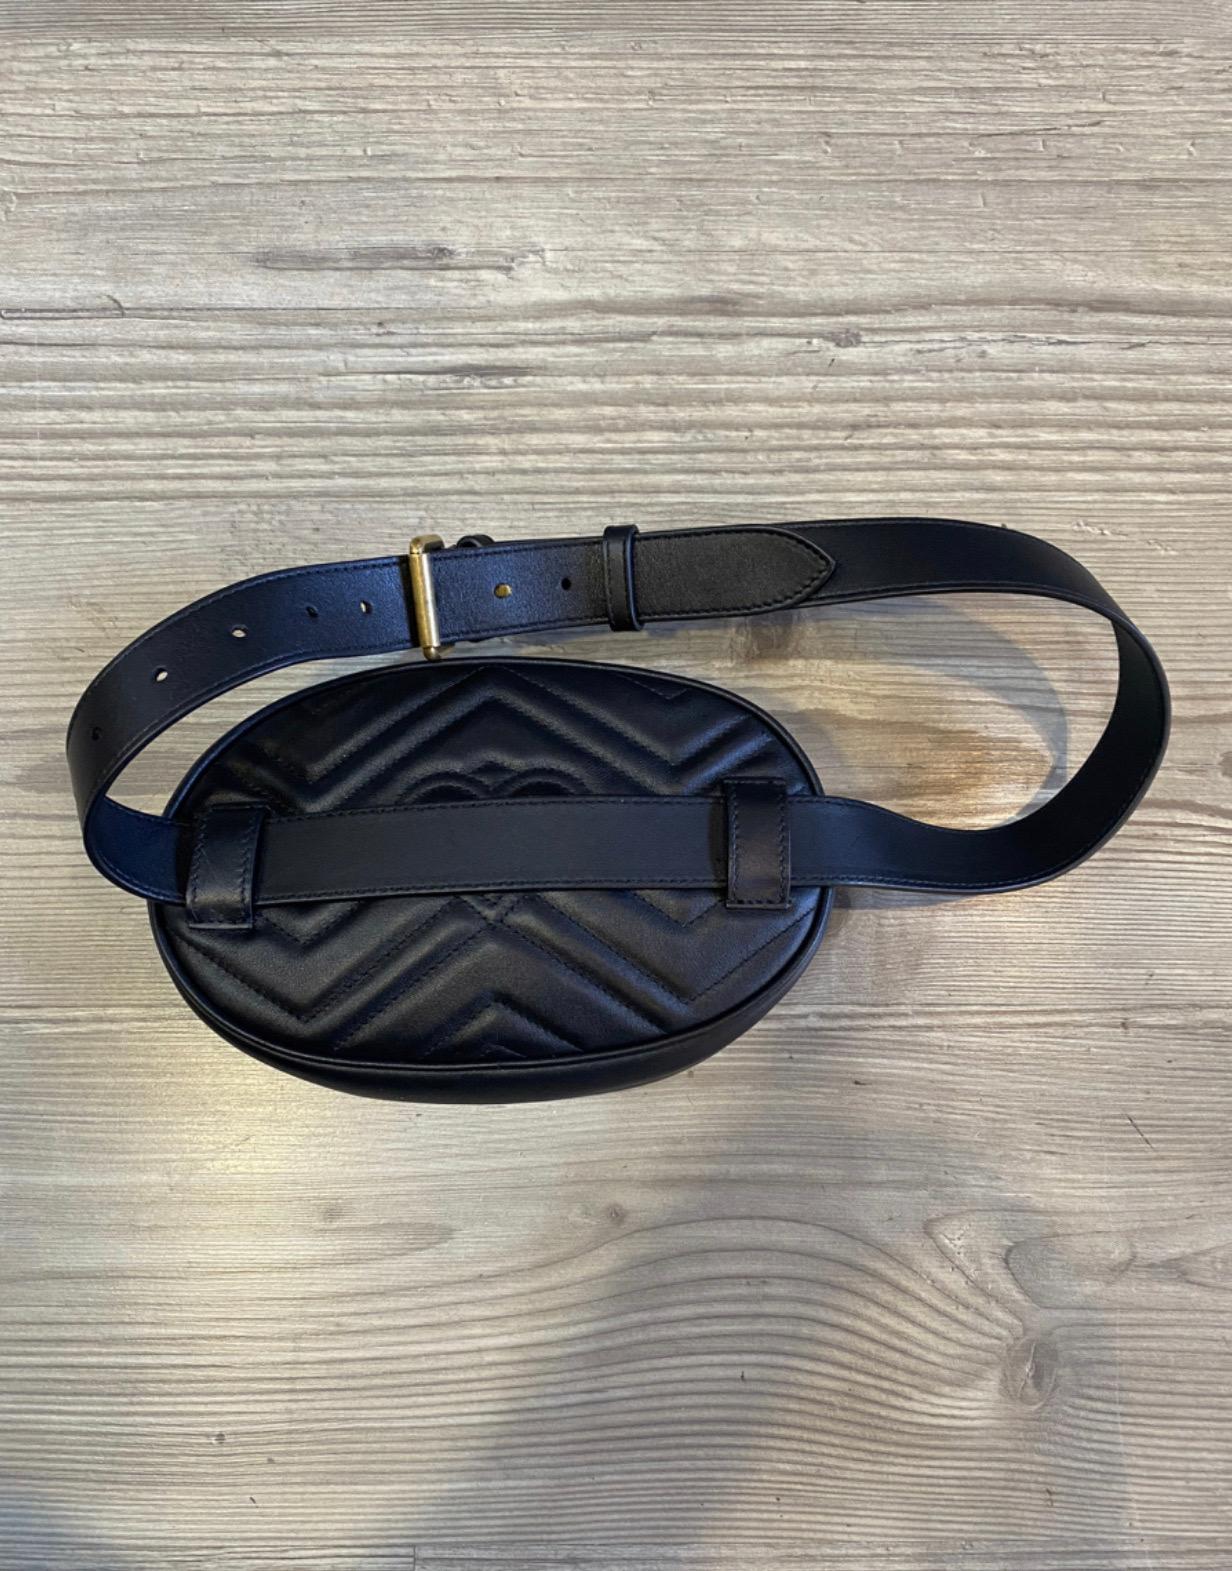 Gucci GG Marmont bum bag 
in black leather featuring golden hardware.
measurements: length 22cm, height 14cm, thickness 6cm, belt measurements: length 85cm, height 34cm, in excellent condition